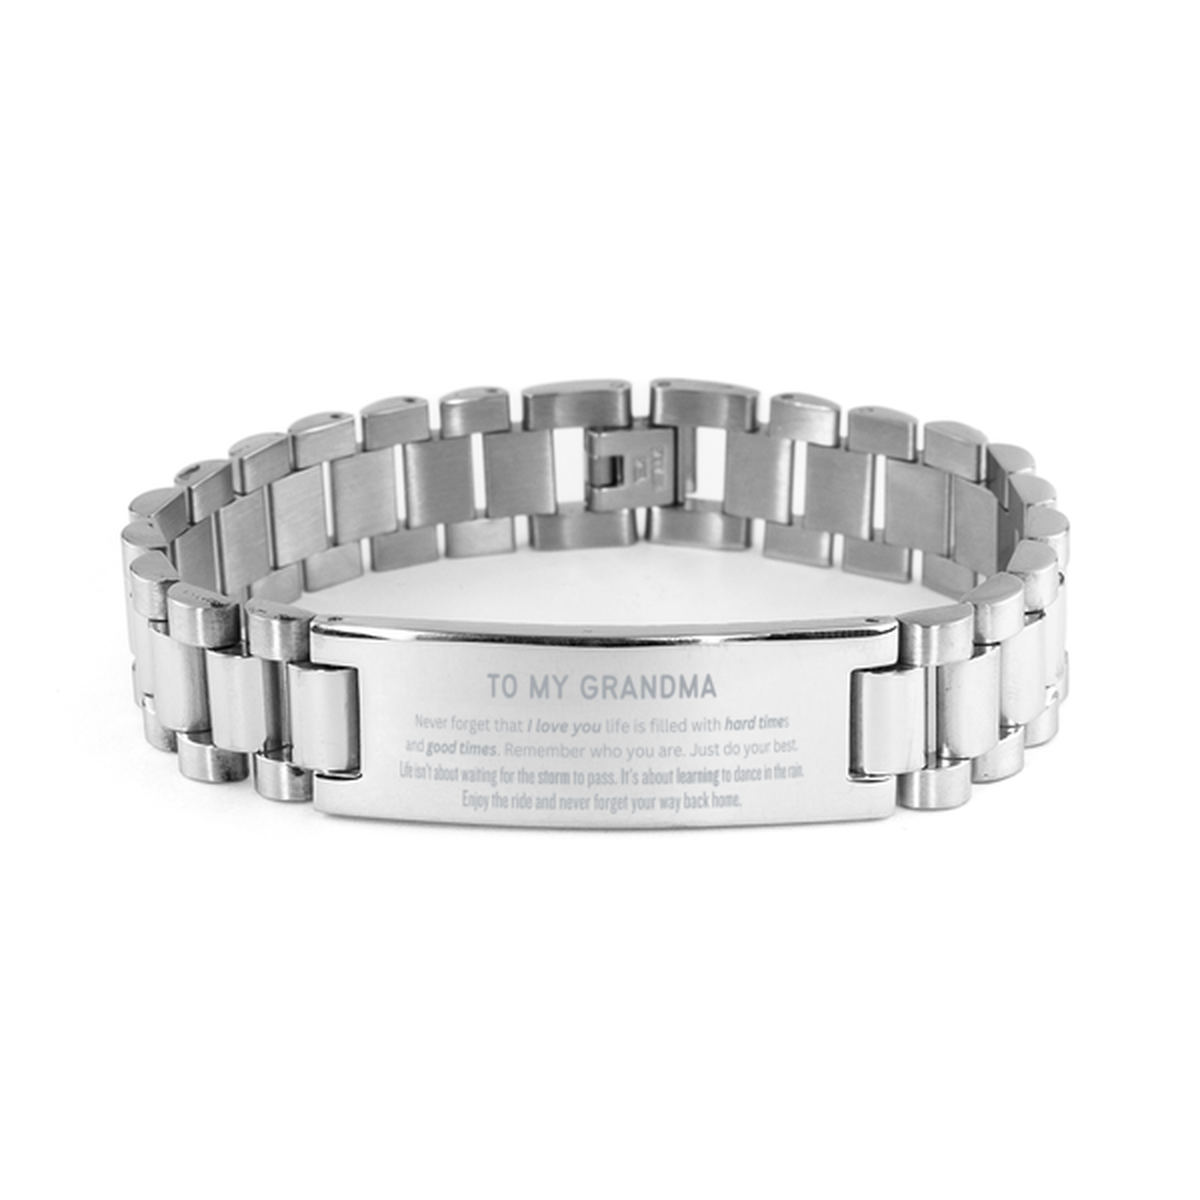 Christmas Grandma Ladder Stainless Steel Bracelet Gifts, To My Grandma Birthday Thank You Gifts For Grandma, Graduation Unique Gifts For Grandma To My Grandma Never forget that I love you life is filled with hard times and good times. Remember who you are